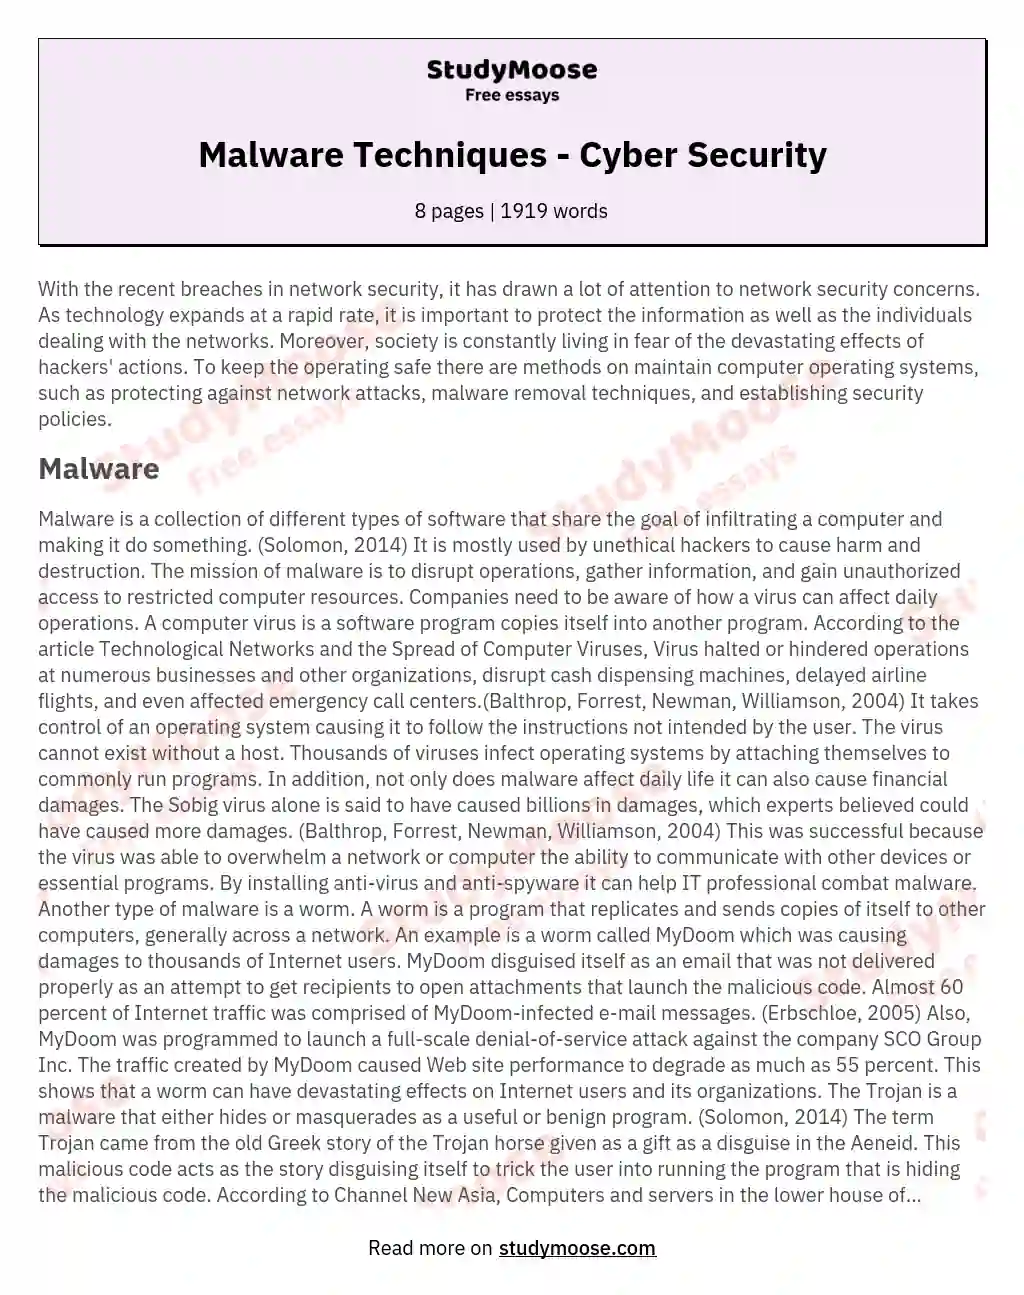 Malware Techniques - Cyber Security essay